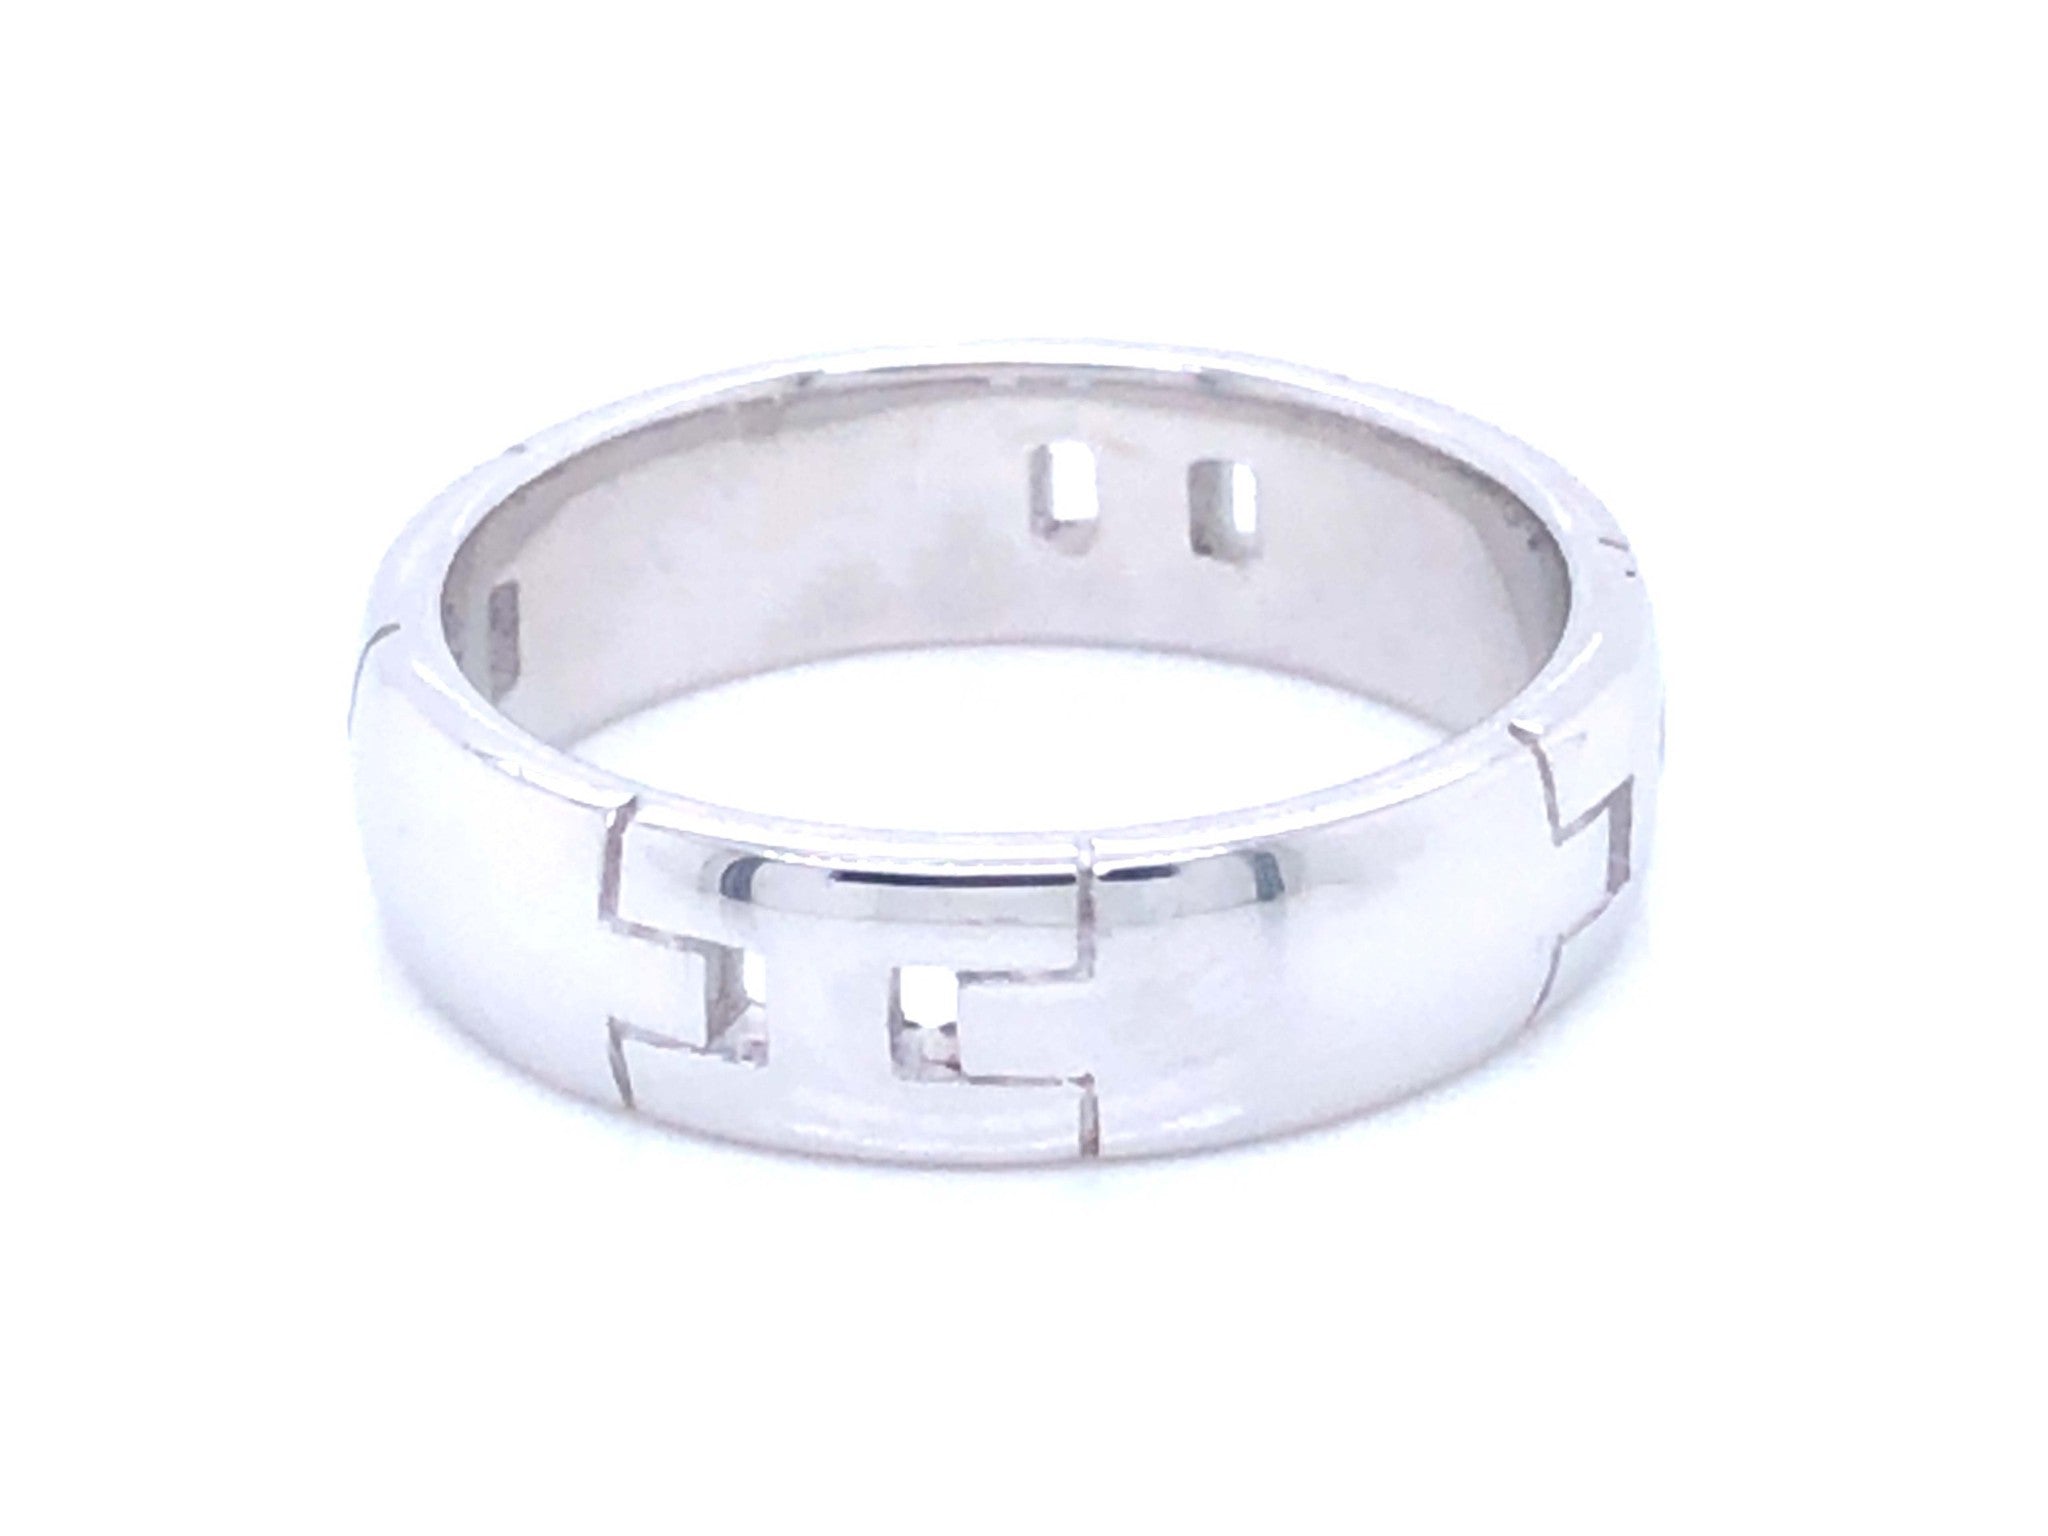 Hermes Hercules Band Ring in 18k White Gold, Size 52